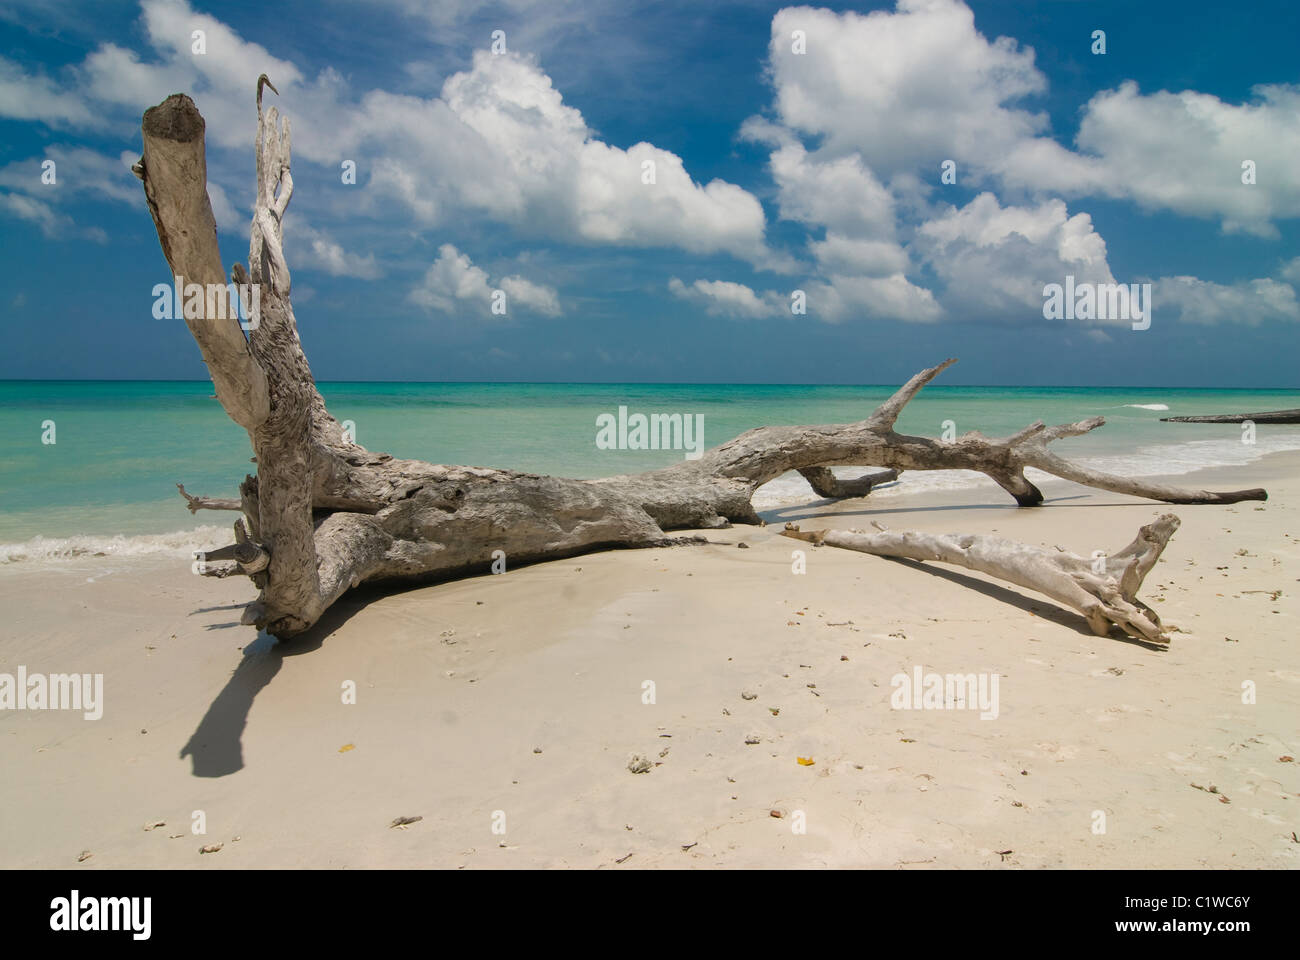 Root at silver sand beach with turquoise India Ocean. Havelock Island. Andaman Isles. India. Stock Photo